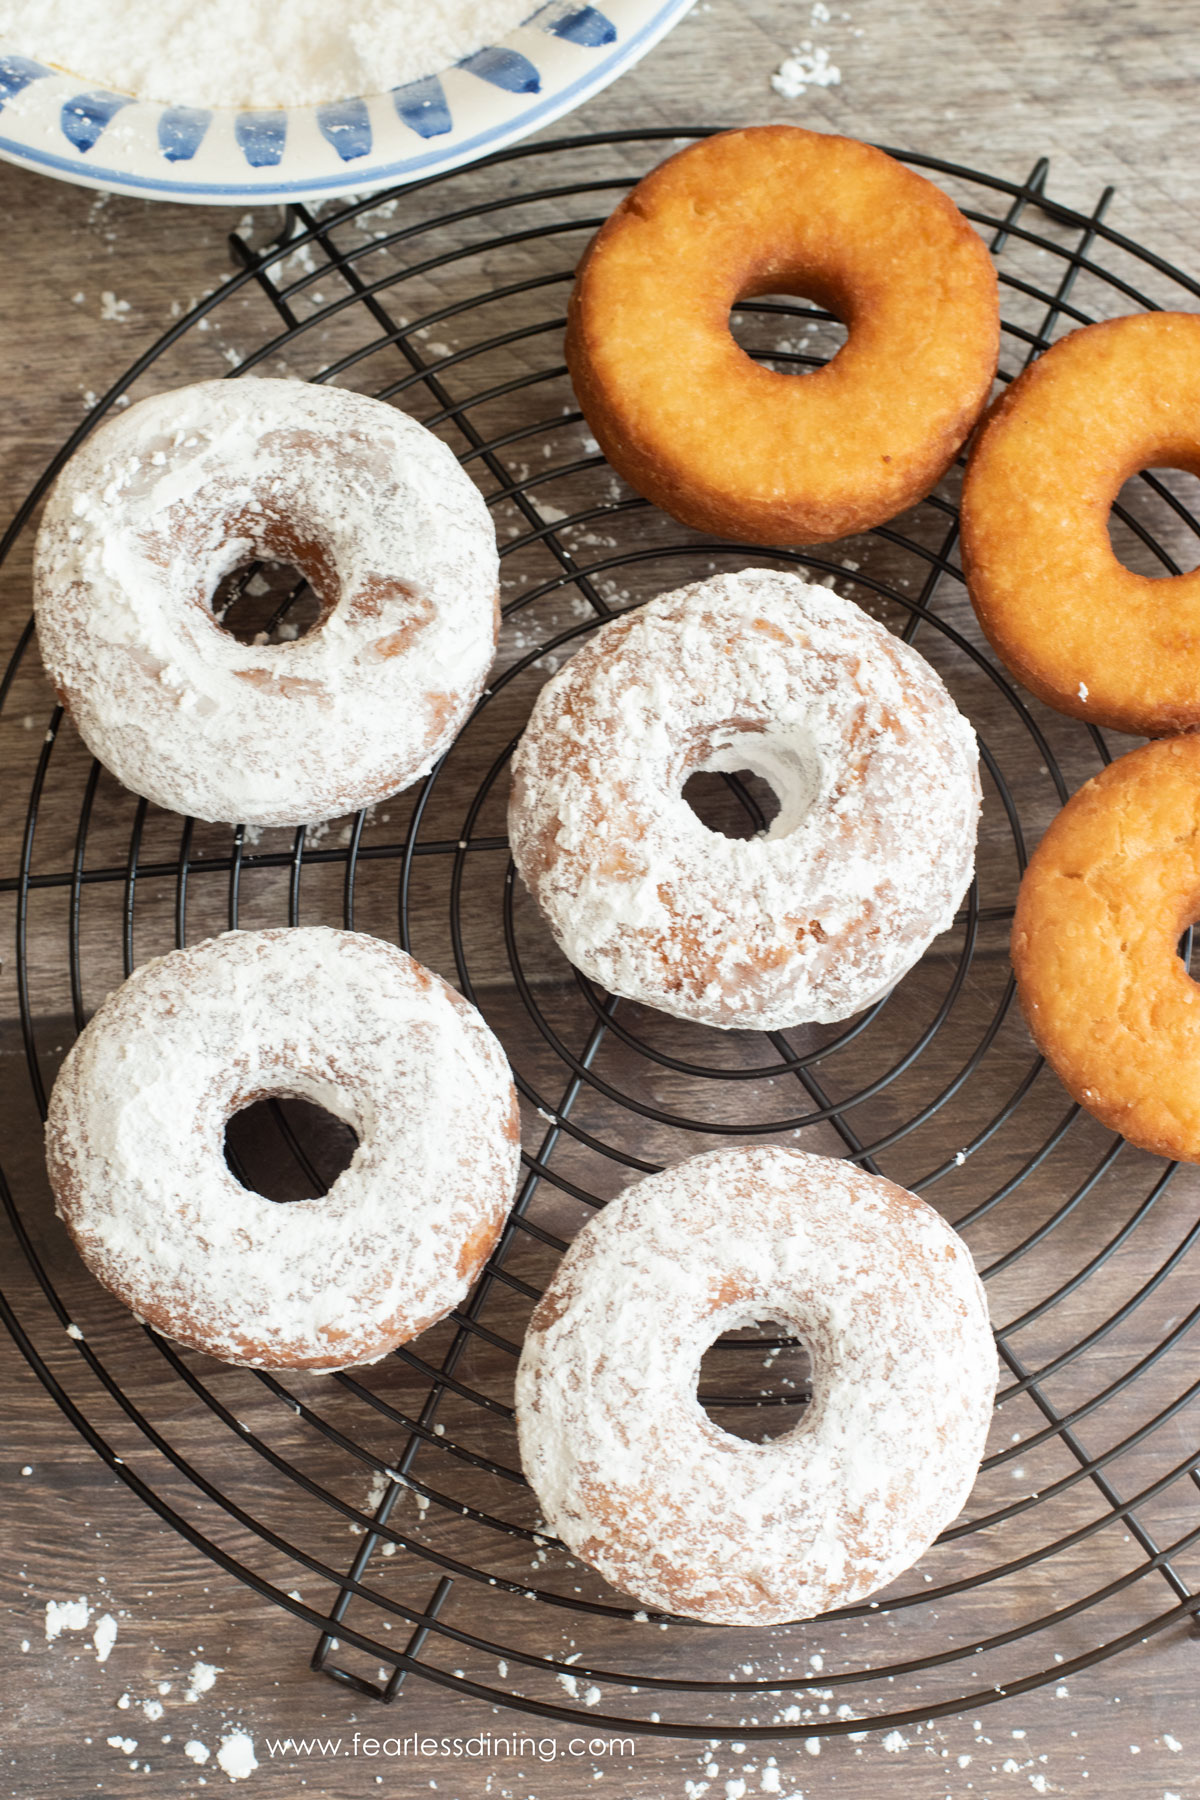 Dipping donuts in powdered sugar.